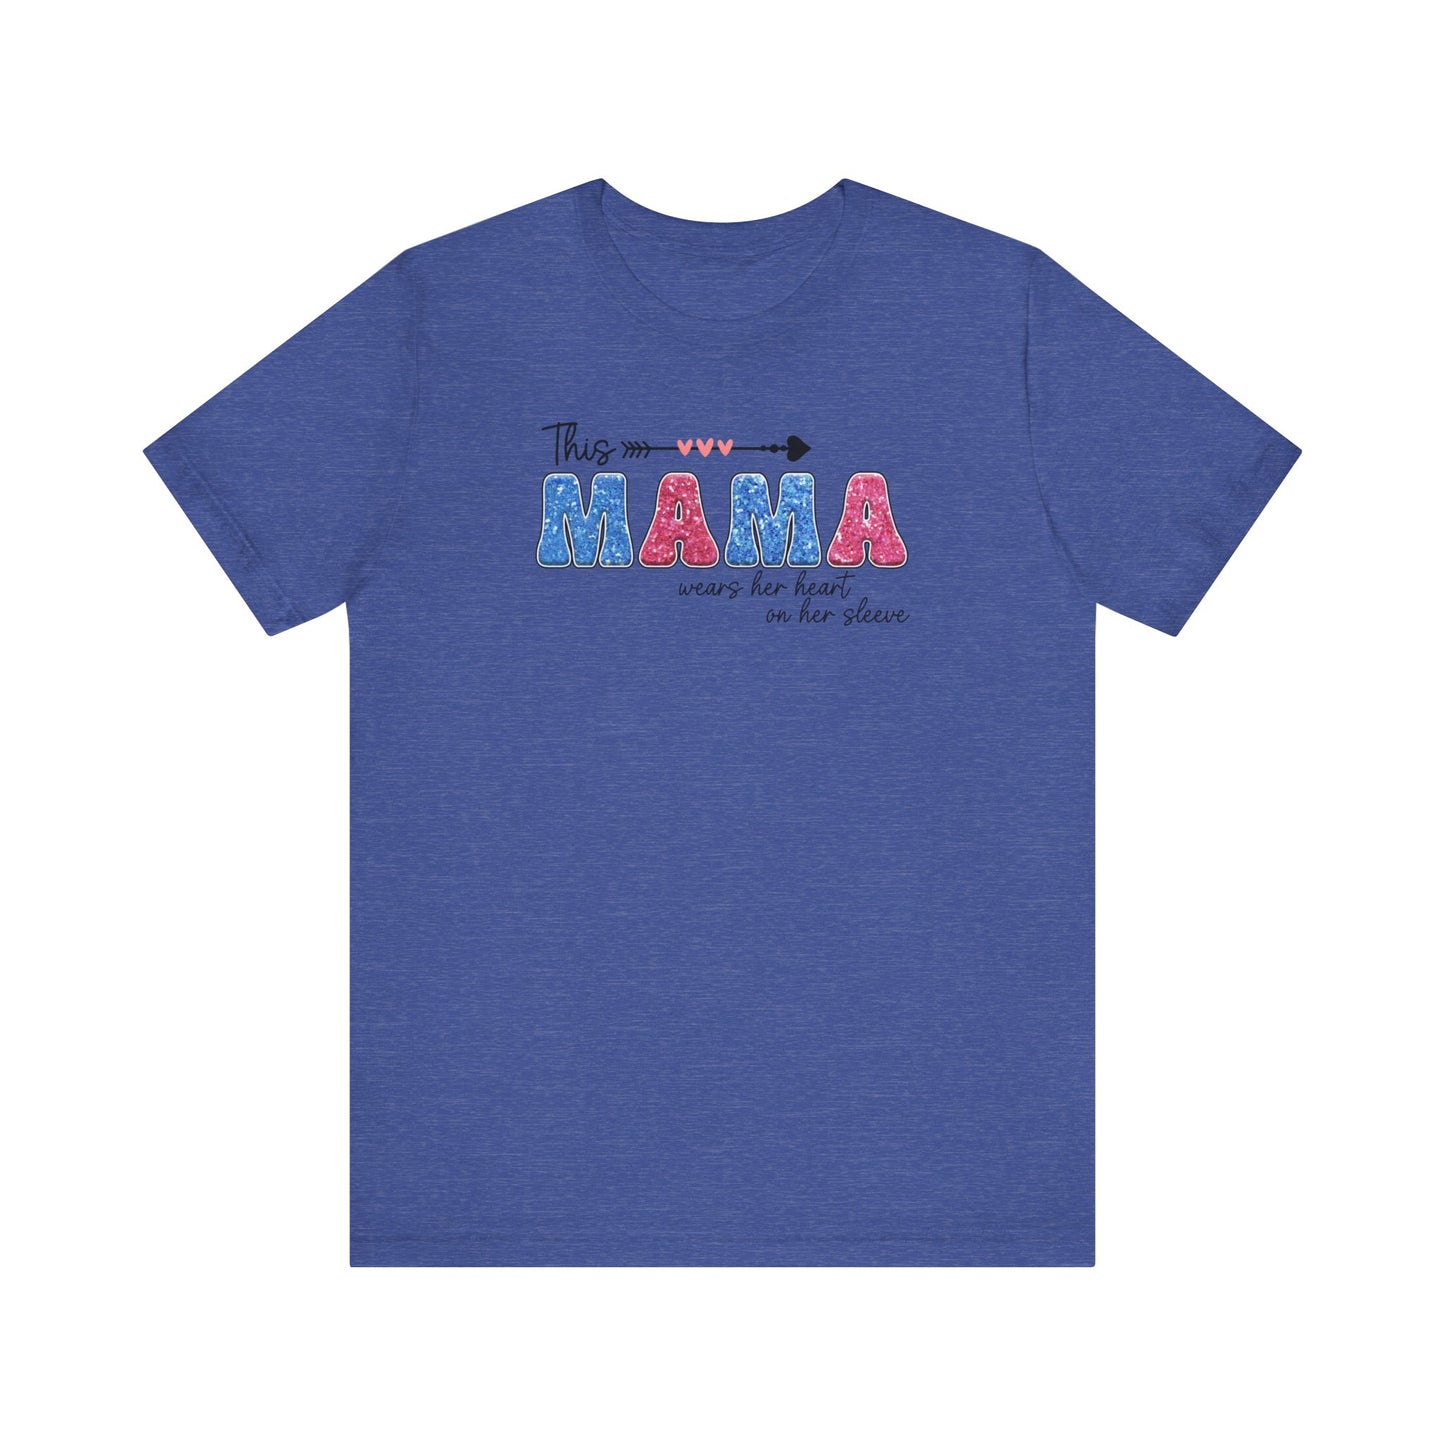 This Mama Wears Her Heart On Her Sleeve Shirt, Mother's Day Gift, Mom Tee, Mama Tshirt (Mom-31)